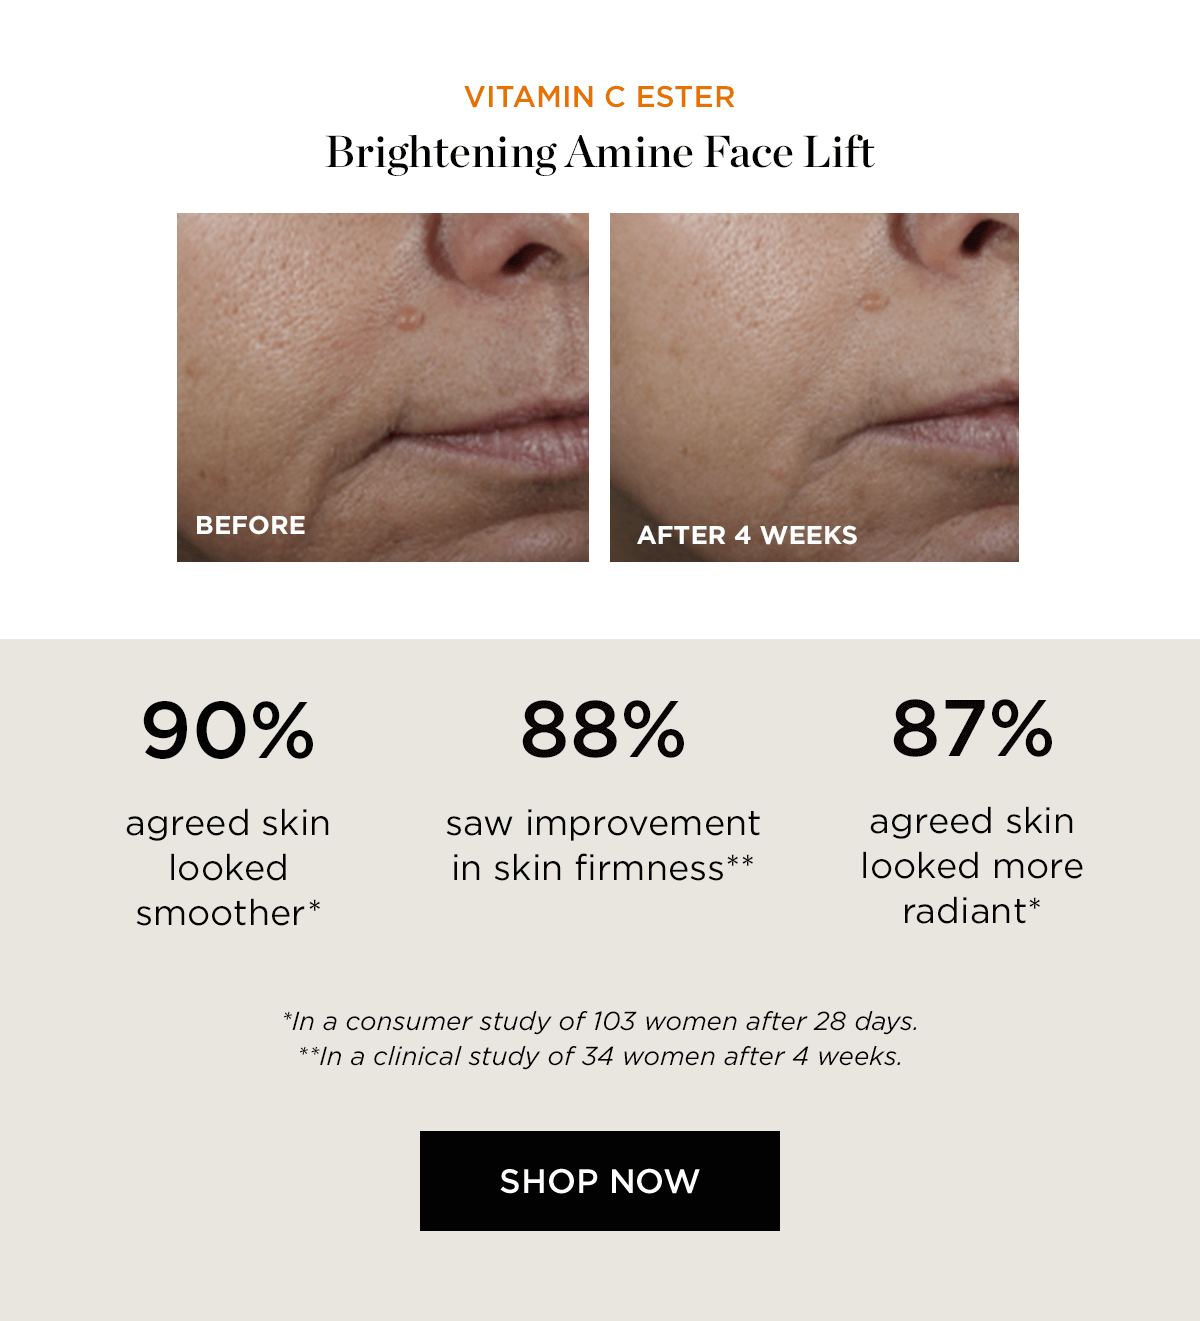 VITAMIN C ESTER Brightening Amine Face Lift z L AFTER 4 WEEKS 90% 88% 87% agreed skin saw improvement agreed skin looked in skin firmness** looked more smoother* radiant* *In @ consumer study of 103 women after 28 days. **In a clinical study of 34 women after 4 weeks. SHOP NOW 